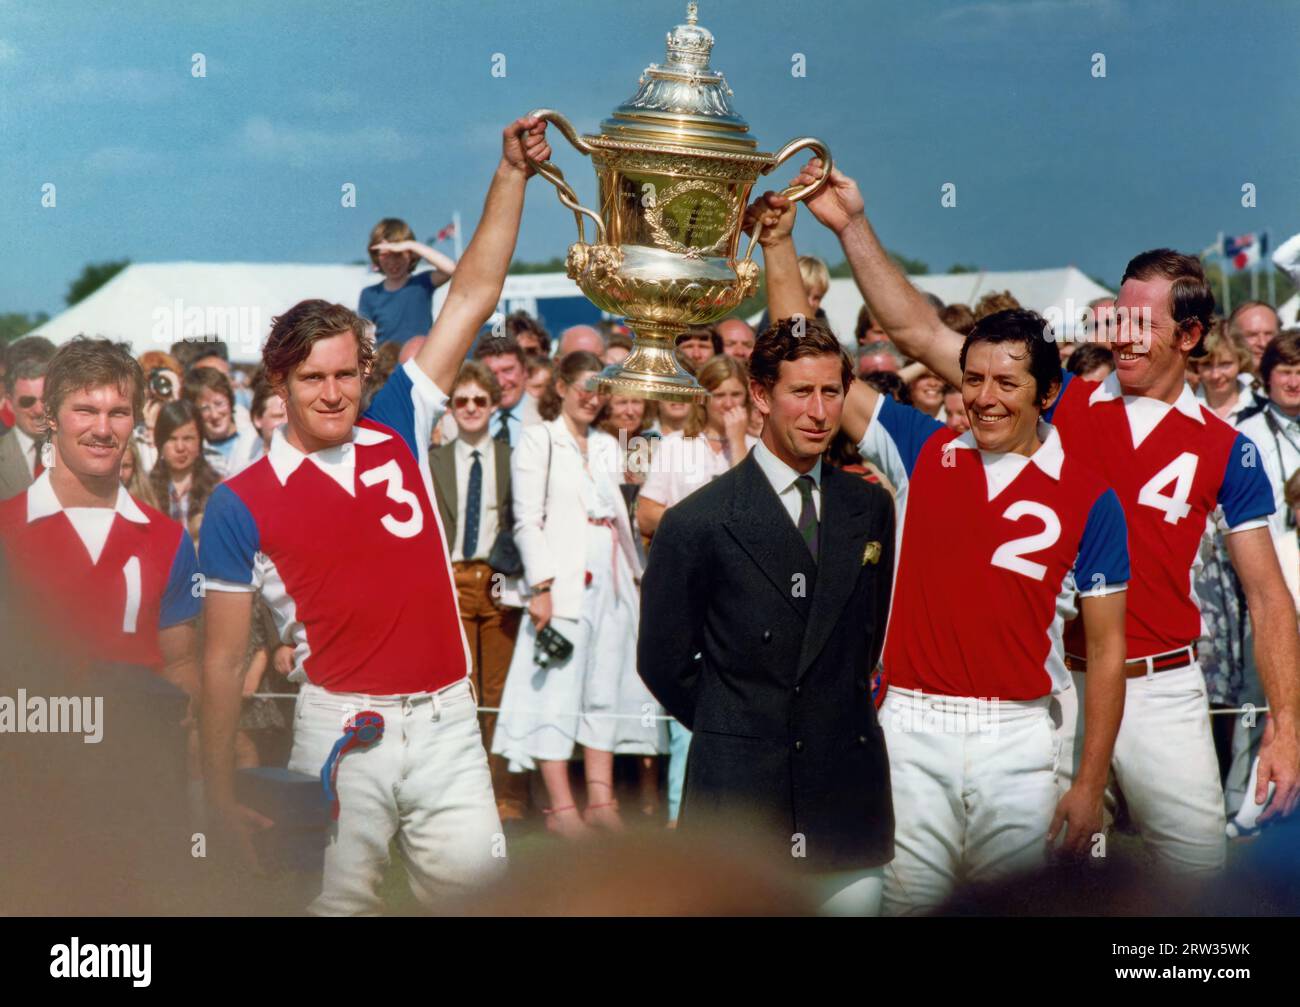 Prince Charles presenting the Coronation Cup to the winners.The Rest of the World 6, England 5.   Prince Charles presents The Coronation Cup to Antonia Herrers, (WEARING NO 2 on his shirt) the  Mexican captain of the Rest of the World team .Rest of the World Team shirt numbers .No1 J Sieder (6) No  2 A Herrers(9) No 3 Crotto  No 4 (Back) J McKay (7)  ENGLAND No 1 J Horswell (6) No 2 J Hipwood (8) No 3 P Withers (8) Back No 4 H Hipwood (8)  ....... Took place at (1980) Guards Polo Club ,Smiths Lawn ,Windsor Great Park Photo has been restored using  AI ,Topaz Pho AI Stock Photo